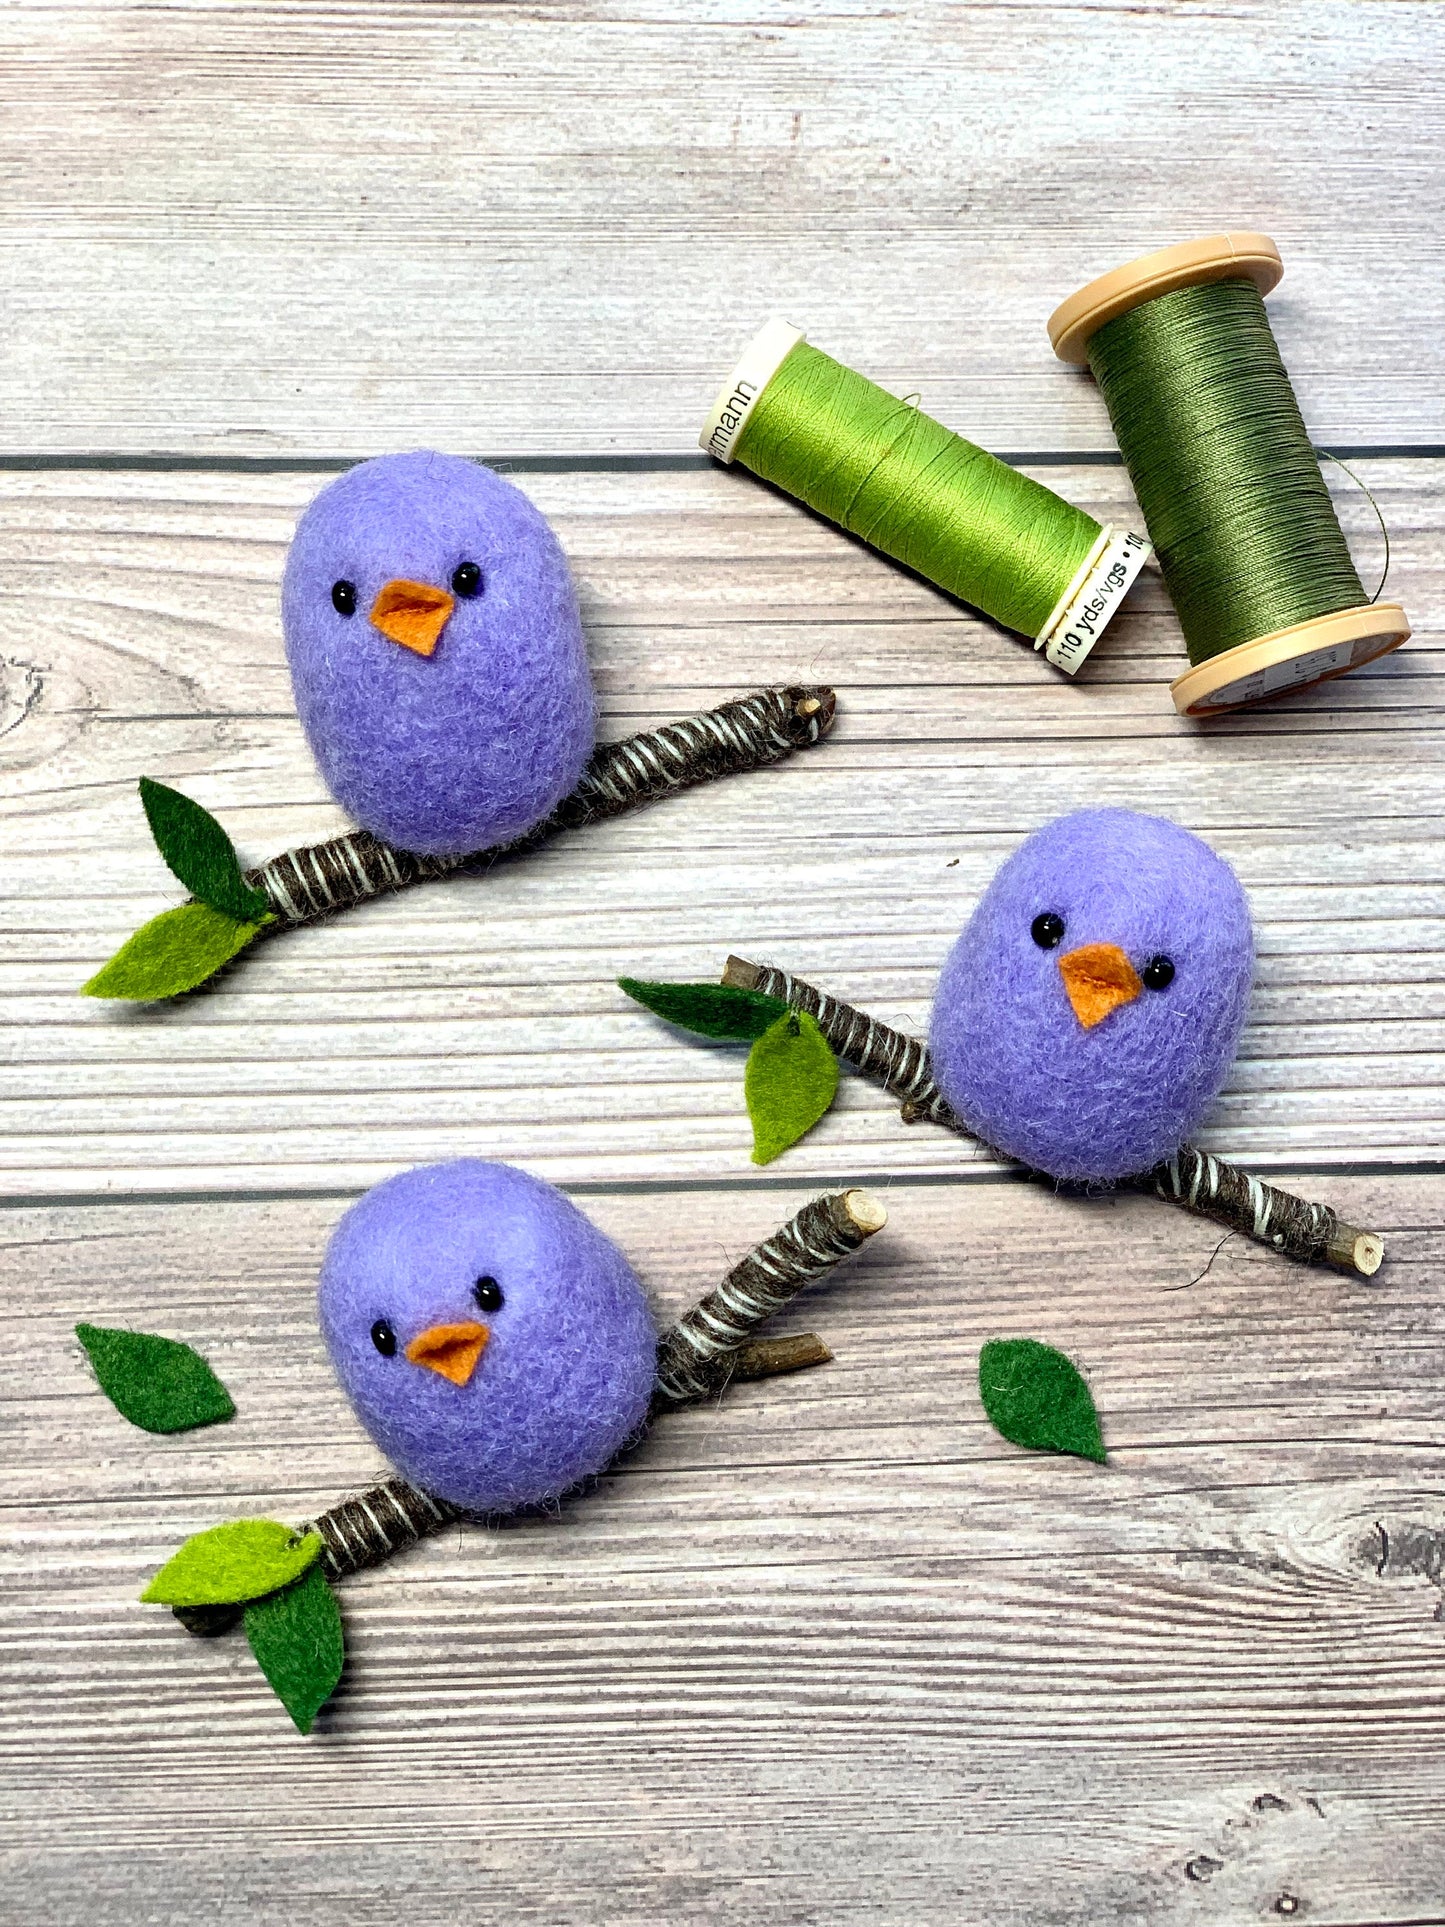 Three needle-felted wool purple birds on branches placed on wooden table